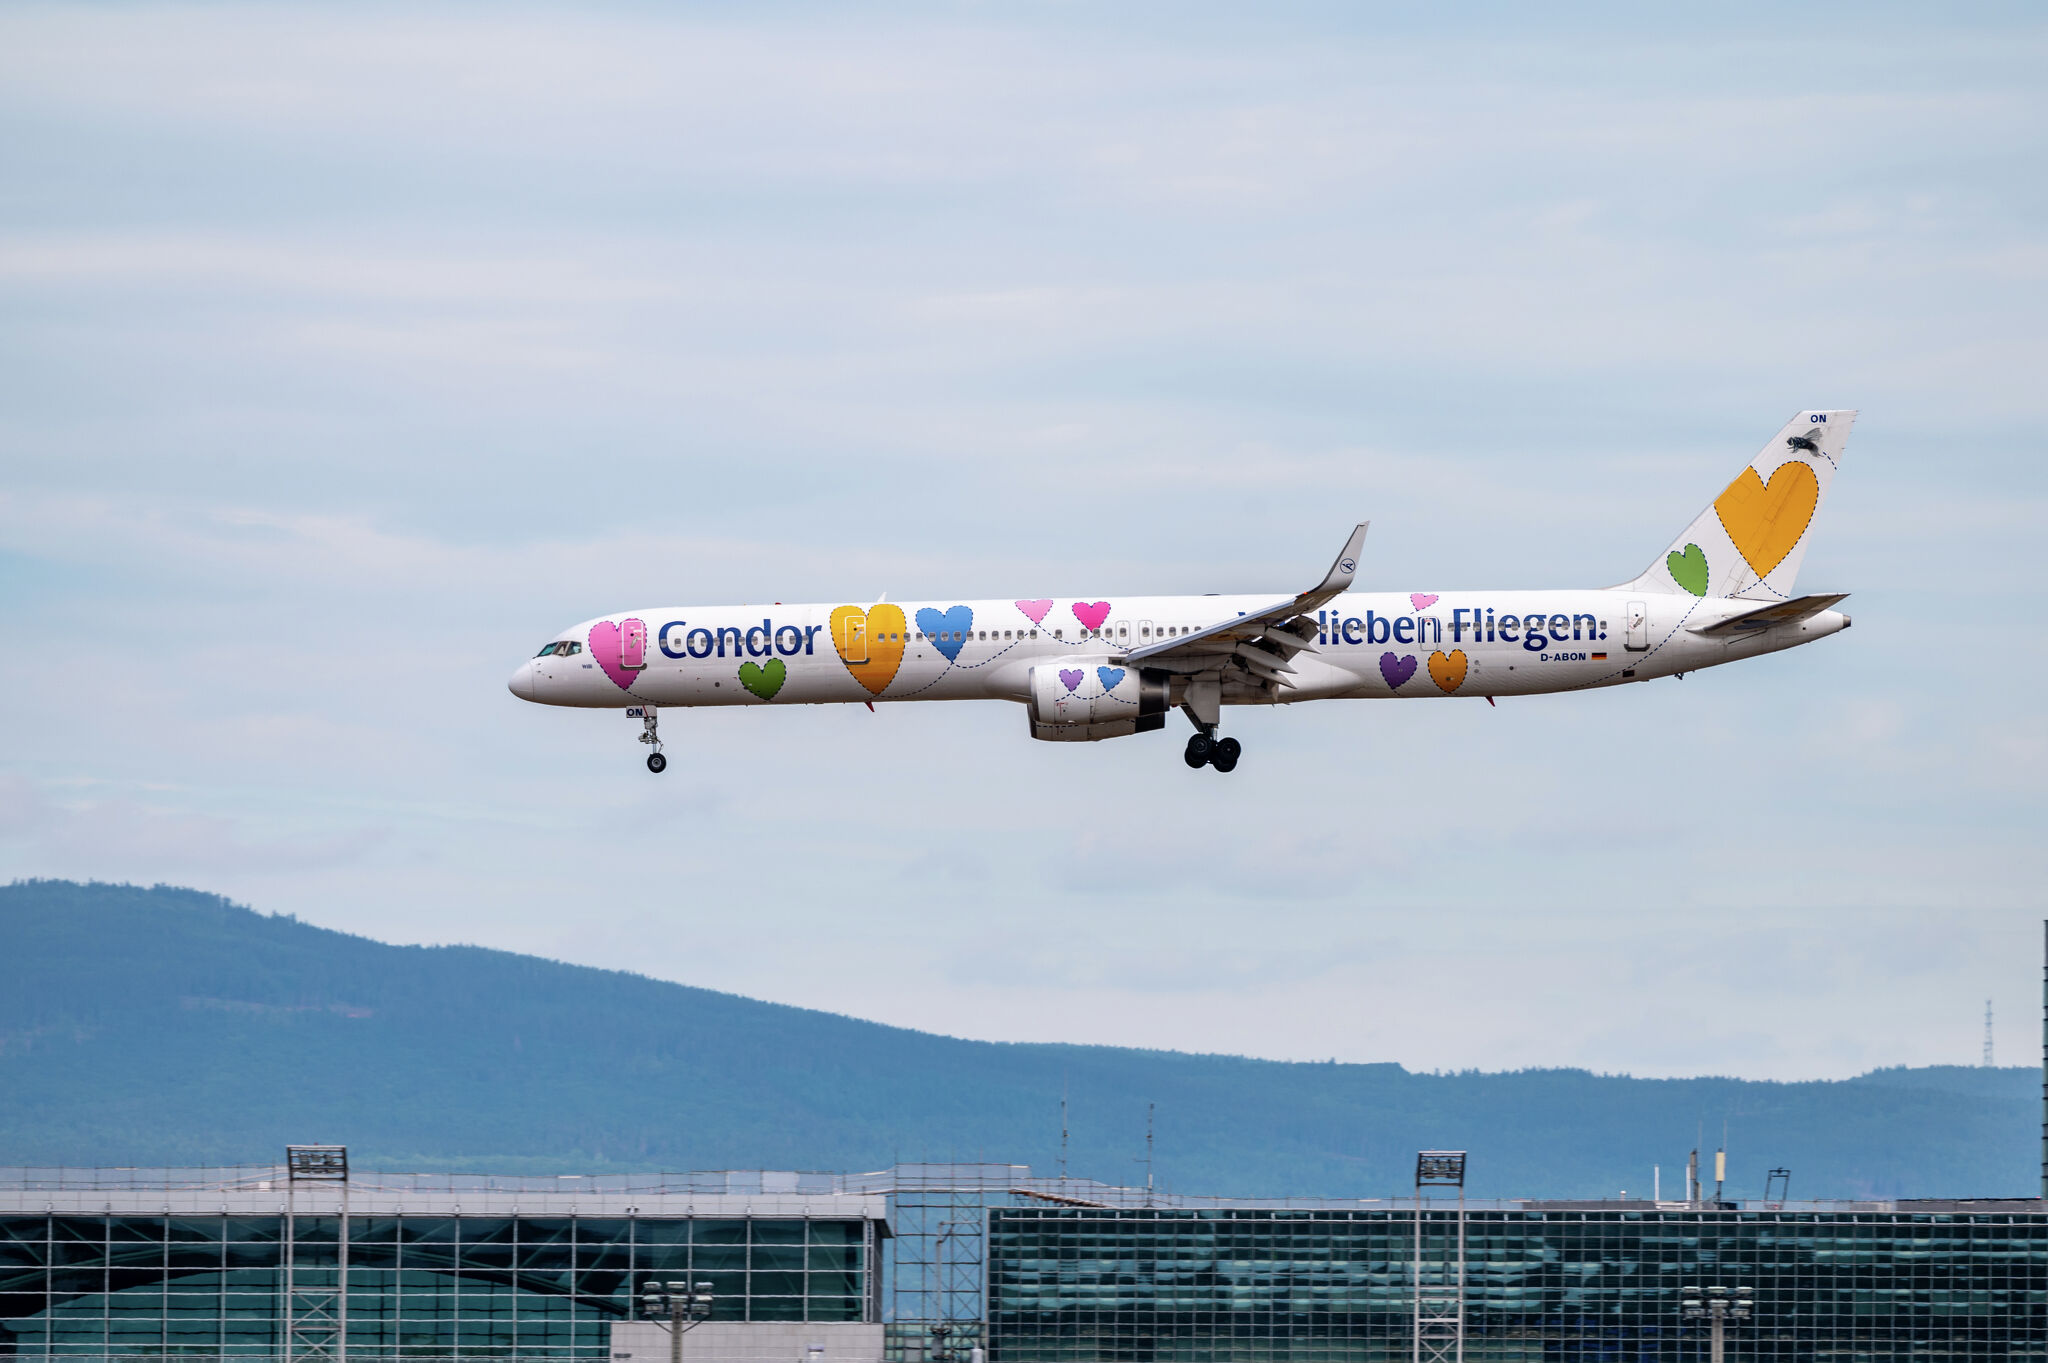 Condor Airlines News on X: We have completed our first mission  #homewithcondor: Almost 78,000 travellers, 3 dogs and 3 cats aboard 400  flights are back home from five continents, 34 countries and